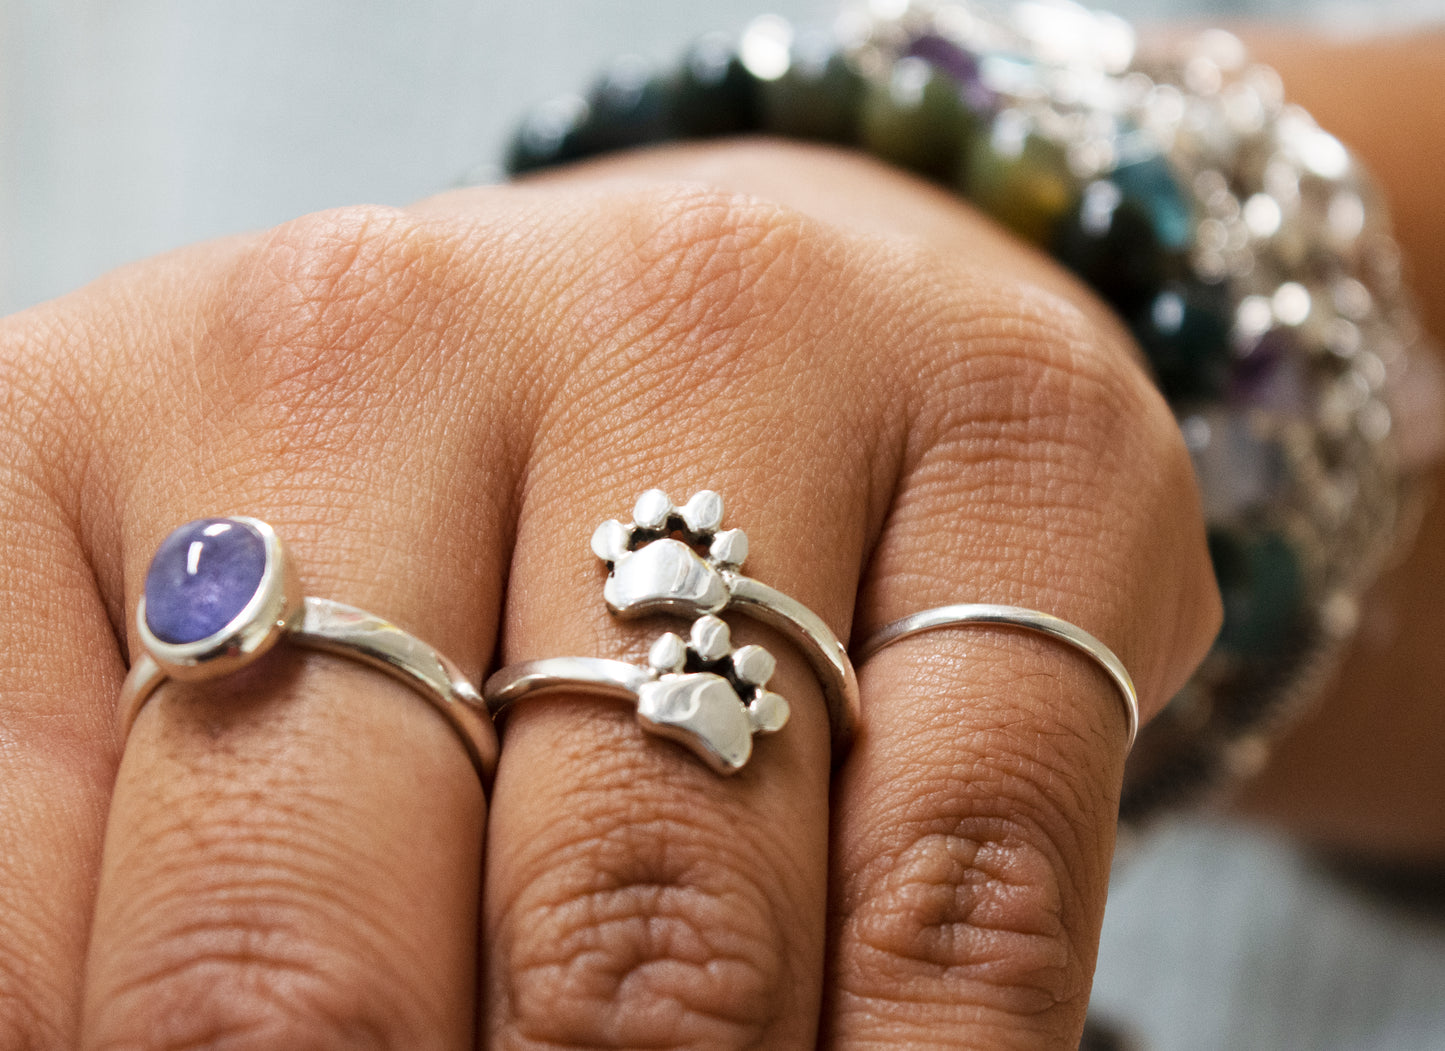 A woman's hand is holding a Super Silver Dog Paw Print Adjustable Ring.